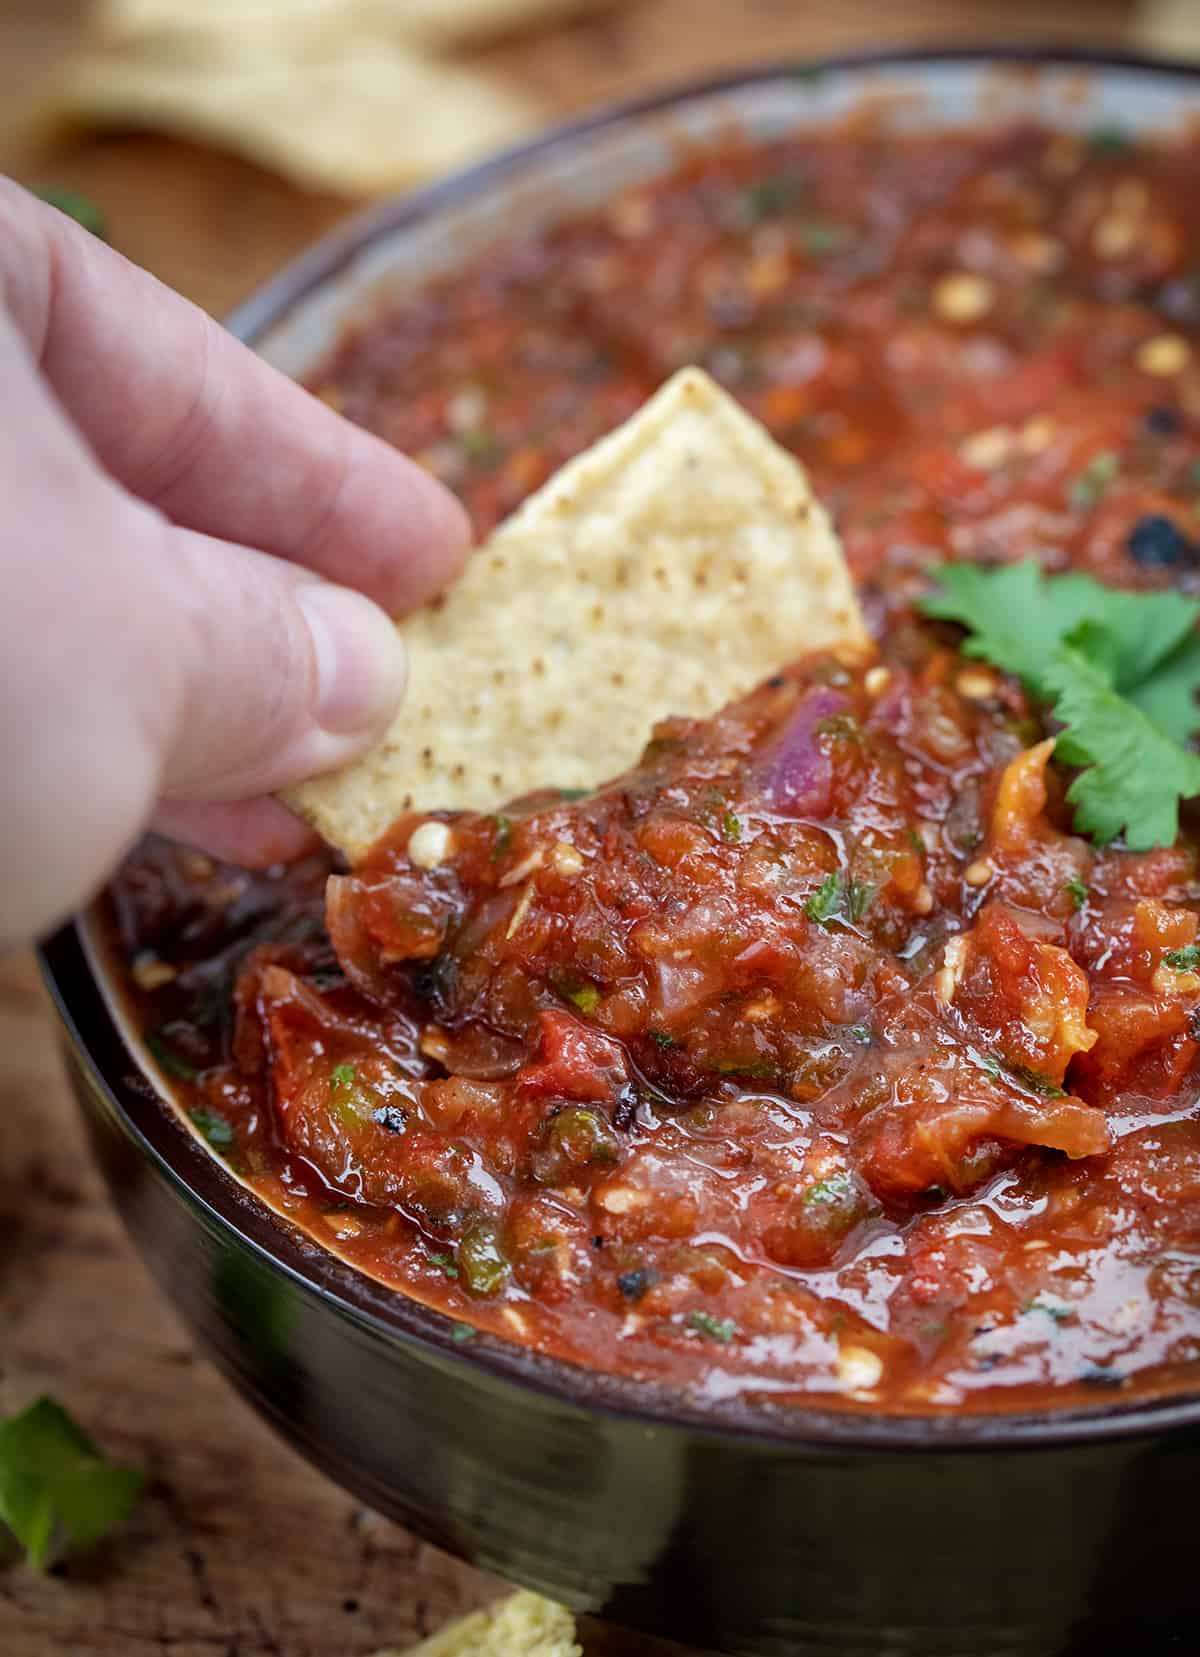 Hand Dipping Chip into Roasted Salsa.